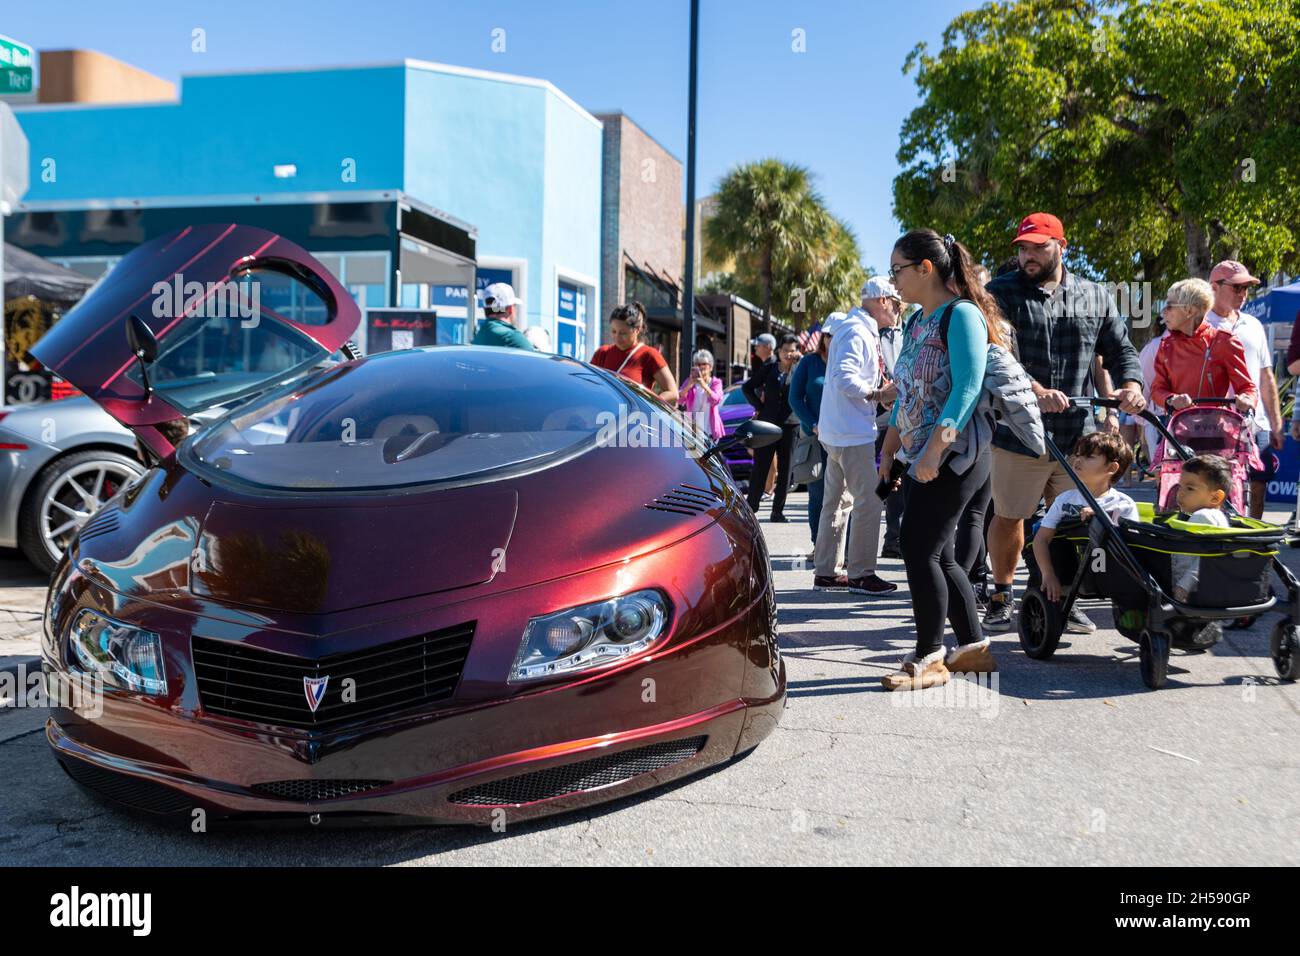 The Exotics on Las Olas audience consists of exotic and supercar car  owners, enthusiasts and collectors in combination with general public  spectators in Fort Lauderdale, FL on November 7, 2021. Some of